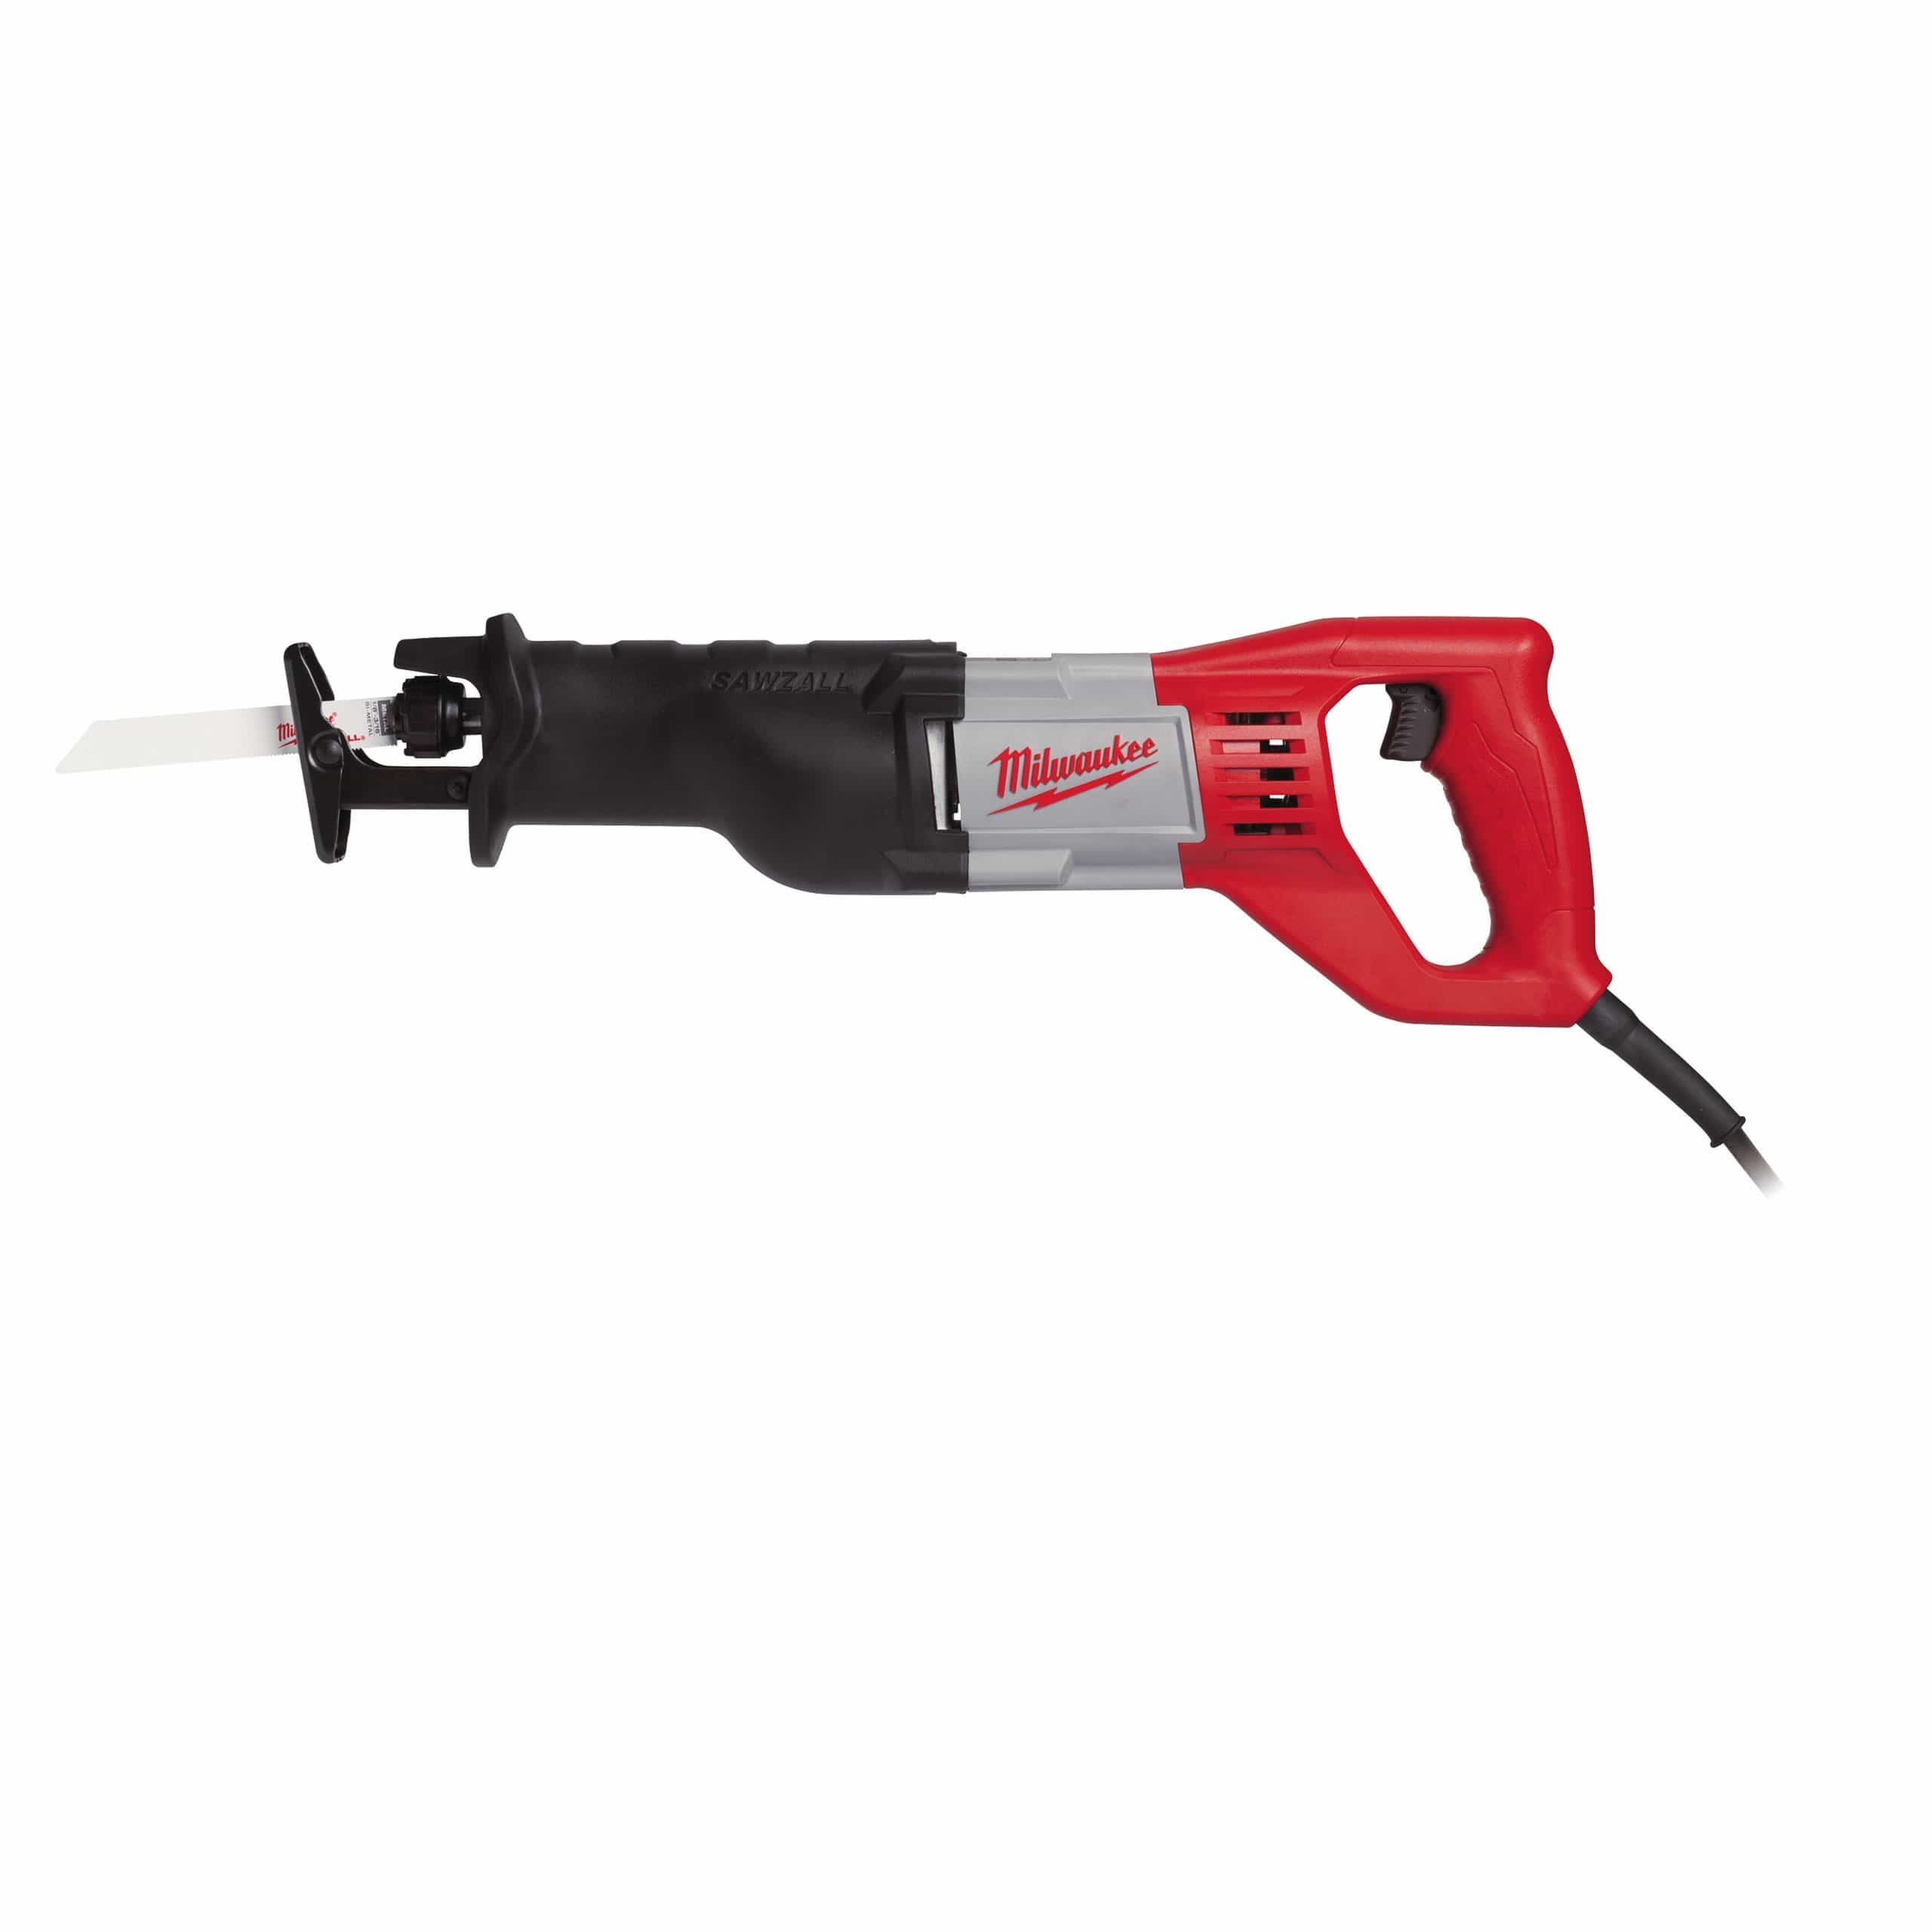 Milwaukee Wall Chaser 1900W 150mm (45mm DOC) - WCS 45 | Supply Master | Accra, Ghana Tools Building Steel Engineering Hardware tool